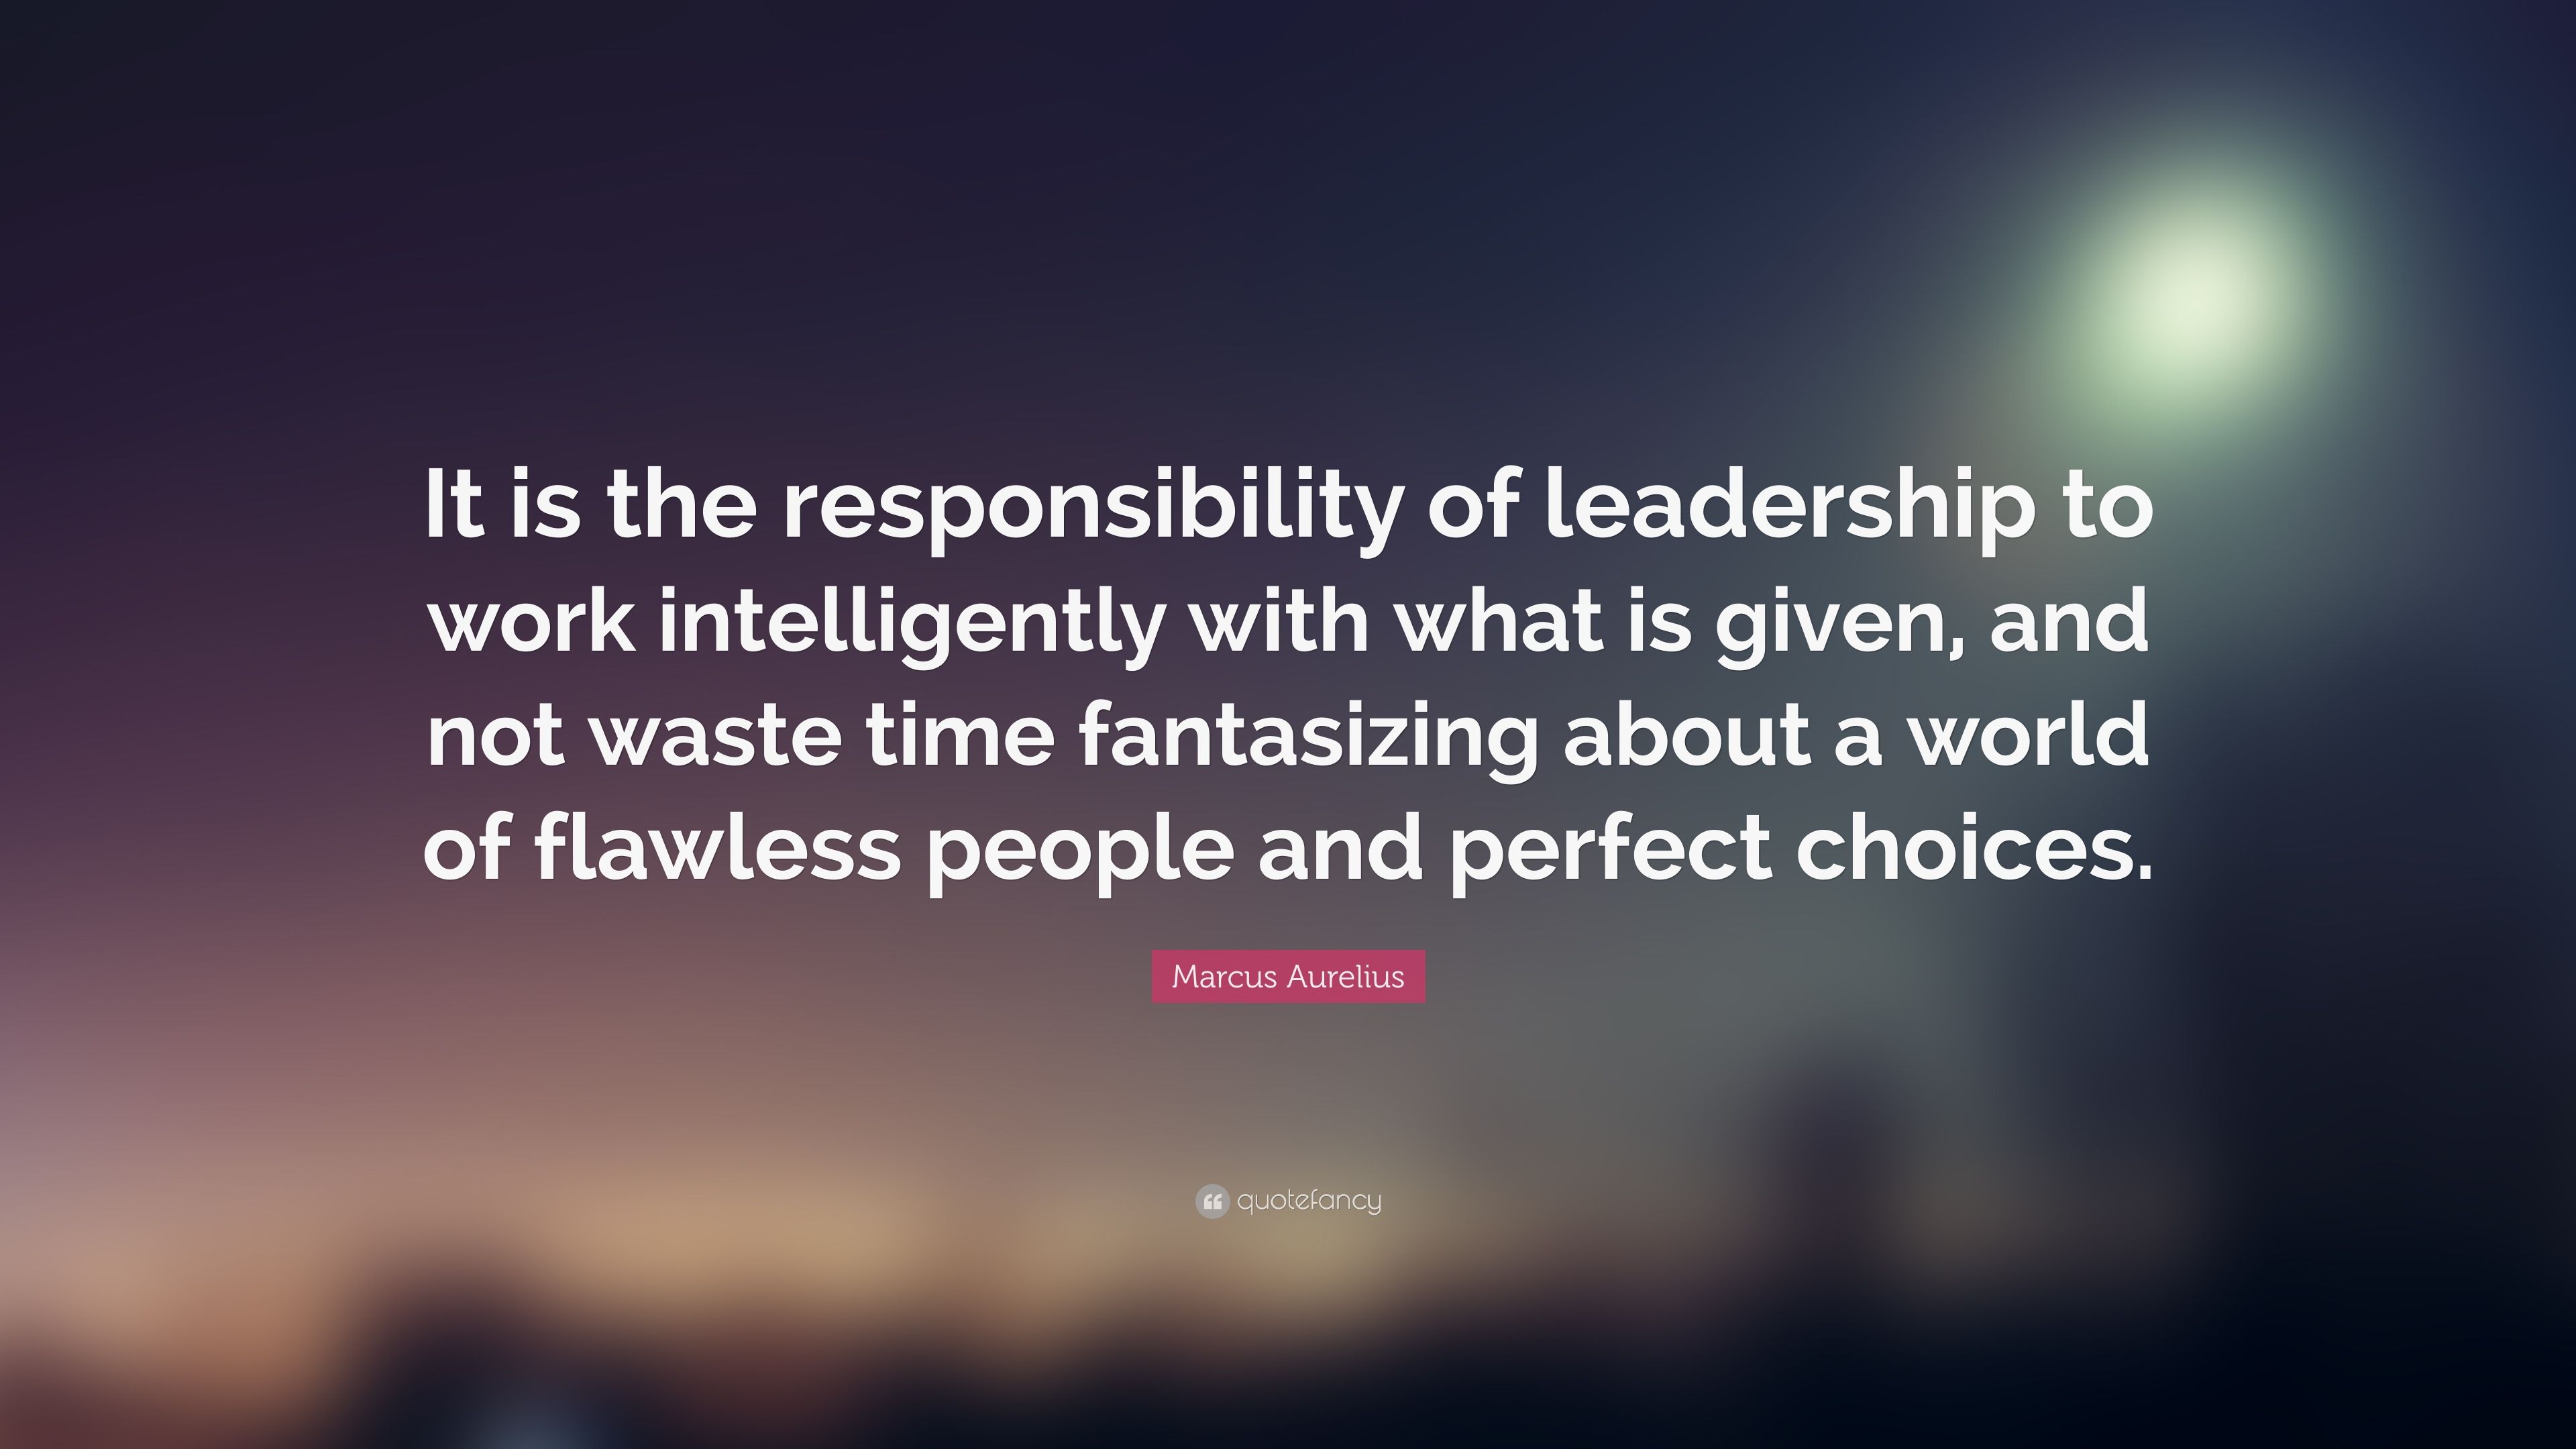 Marcus Aurelius Quote: “It is the responsibility of leadership to work intelligently with what is given, and not waste time fantasizing about a .” (12 wallpaper)